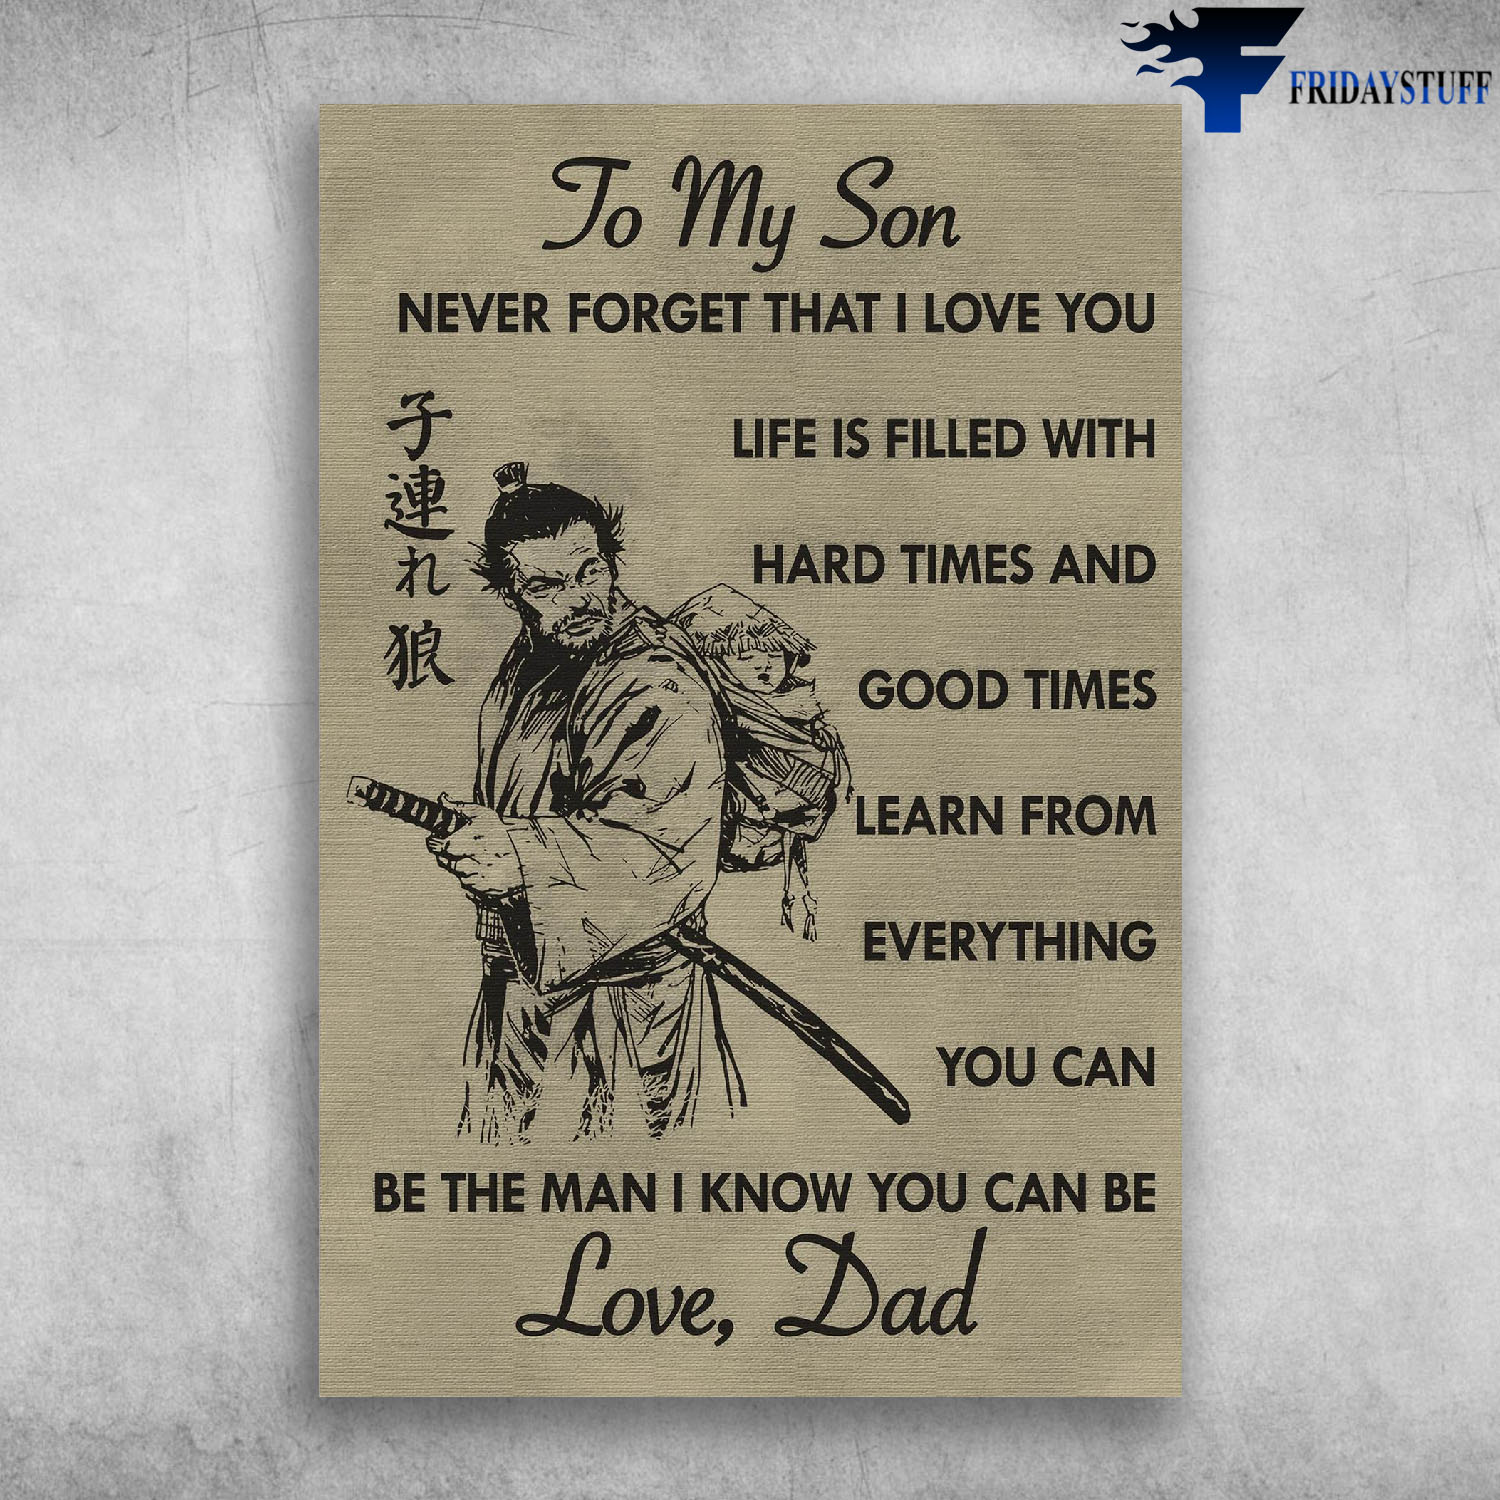 Samurai Father and Son To My Son Never Forget That I Love You - Love, Dad